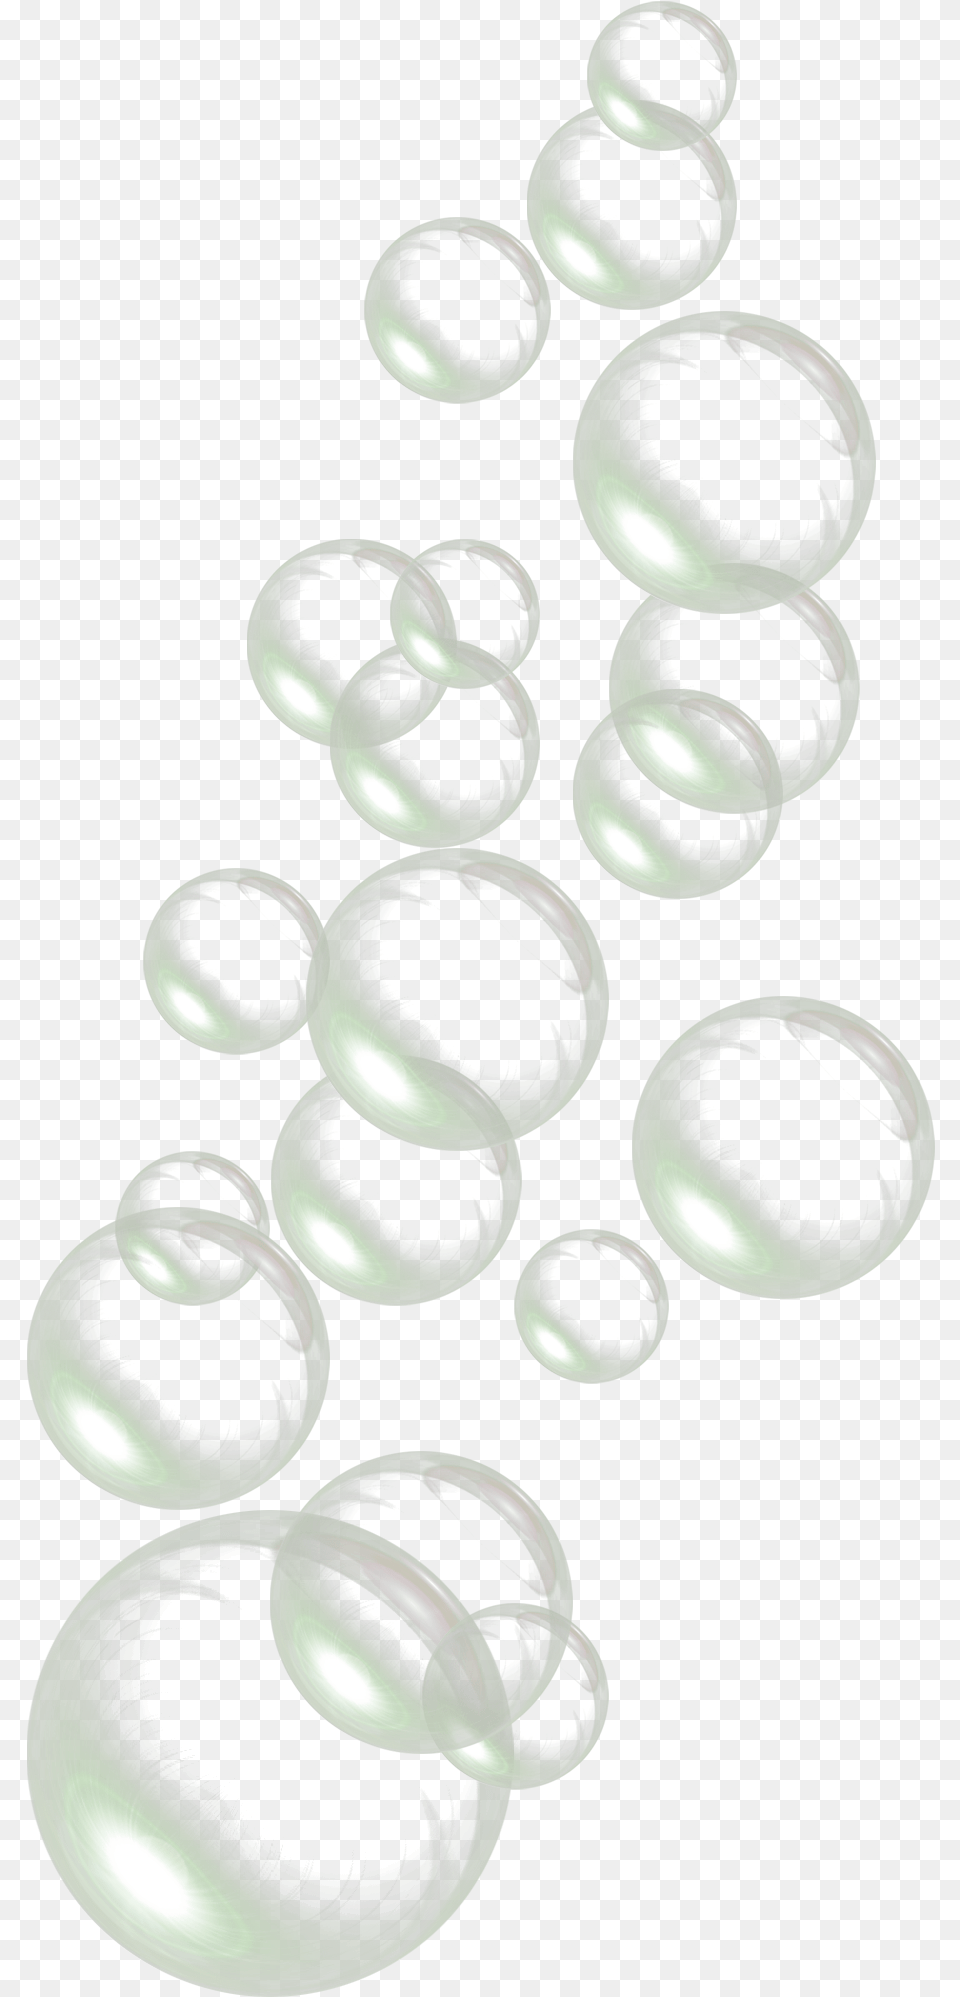 Water Of Bubbles Drops Transparent Image Hq Circle, Accessories, Jewelry, Bubble, Smoke Pipe Free Png